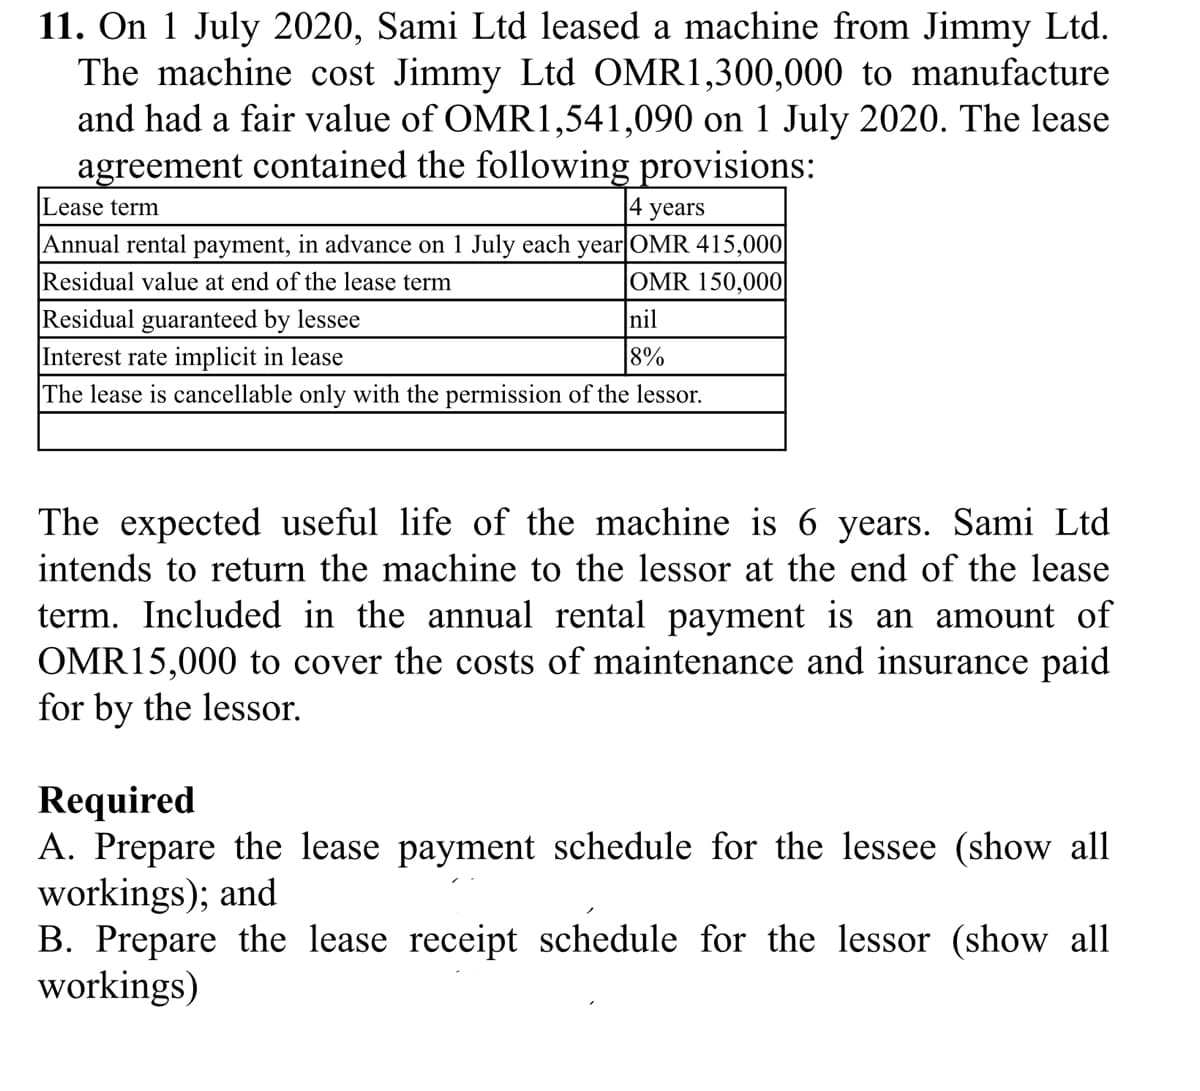 11. On 1 July 2020, Sami Ltd leased a machine from Jimmy Ltd.
The machine cost Jimmy Ltd OMR1,300,000 to manufacture
and had a fair value of OMR1,541,090 on 1 July 2020. The lease
agreement contained the following provisions:
Lease term
|4 years
|Annual rental payment, in advance on 1 July each year OMR 415,000|
Residual value at end of the lease term
Residual guaranteed by lessee
Interest rate implicit in lease
The lease is cancellable only with the permission of the lessor.
OMR 150,000
nil
8%
The expected useful life of the machine is 6 years. Sami Ltd
intends to return the machine to the lessor at the end of the lease
term. Included in the annual rental payment is an amount of
OMR15,000 to cover the costs of maintenance and insurance paid
for by the lessor.
Required
A. Prepare the lease payment schedule for the lessee (show all
workings); and
B. Prepare the lease receipt schedule for the lessor (show all
workings)
